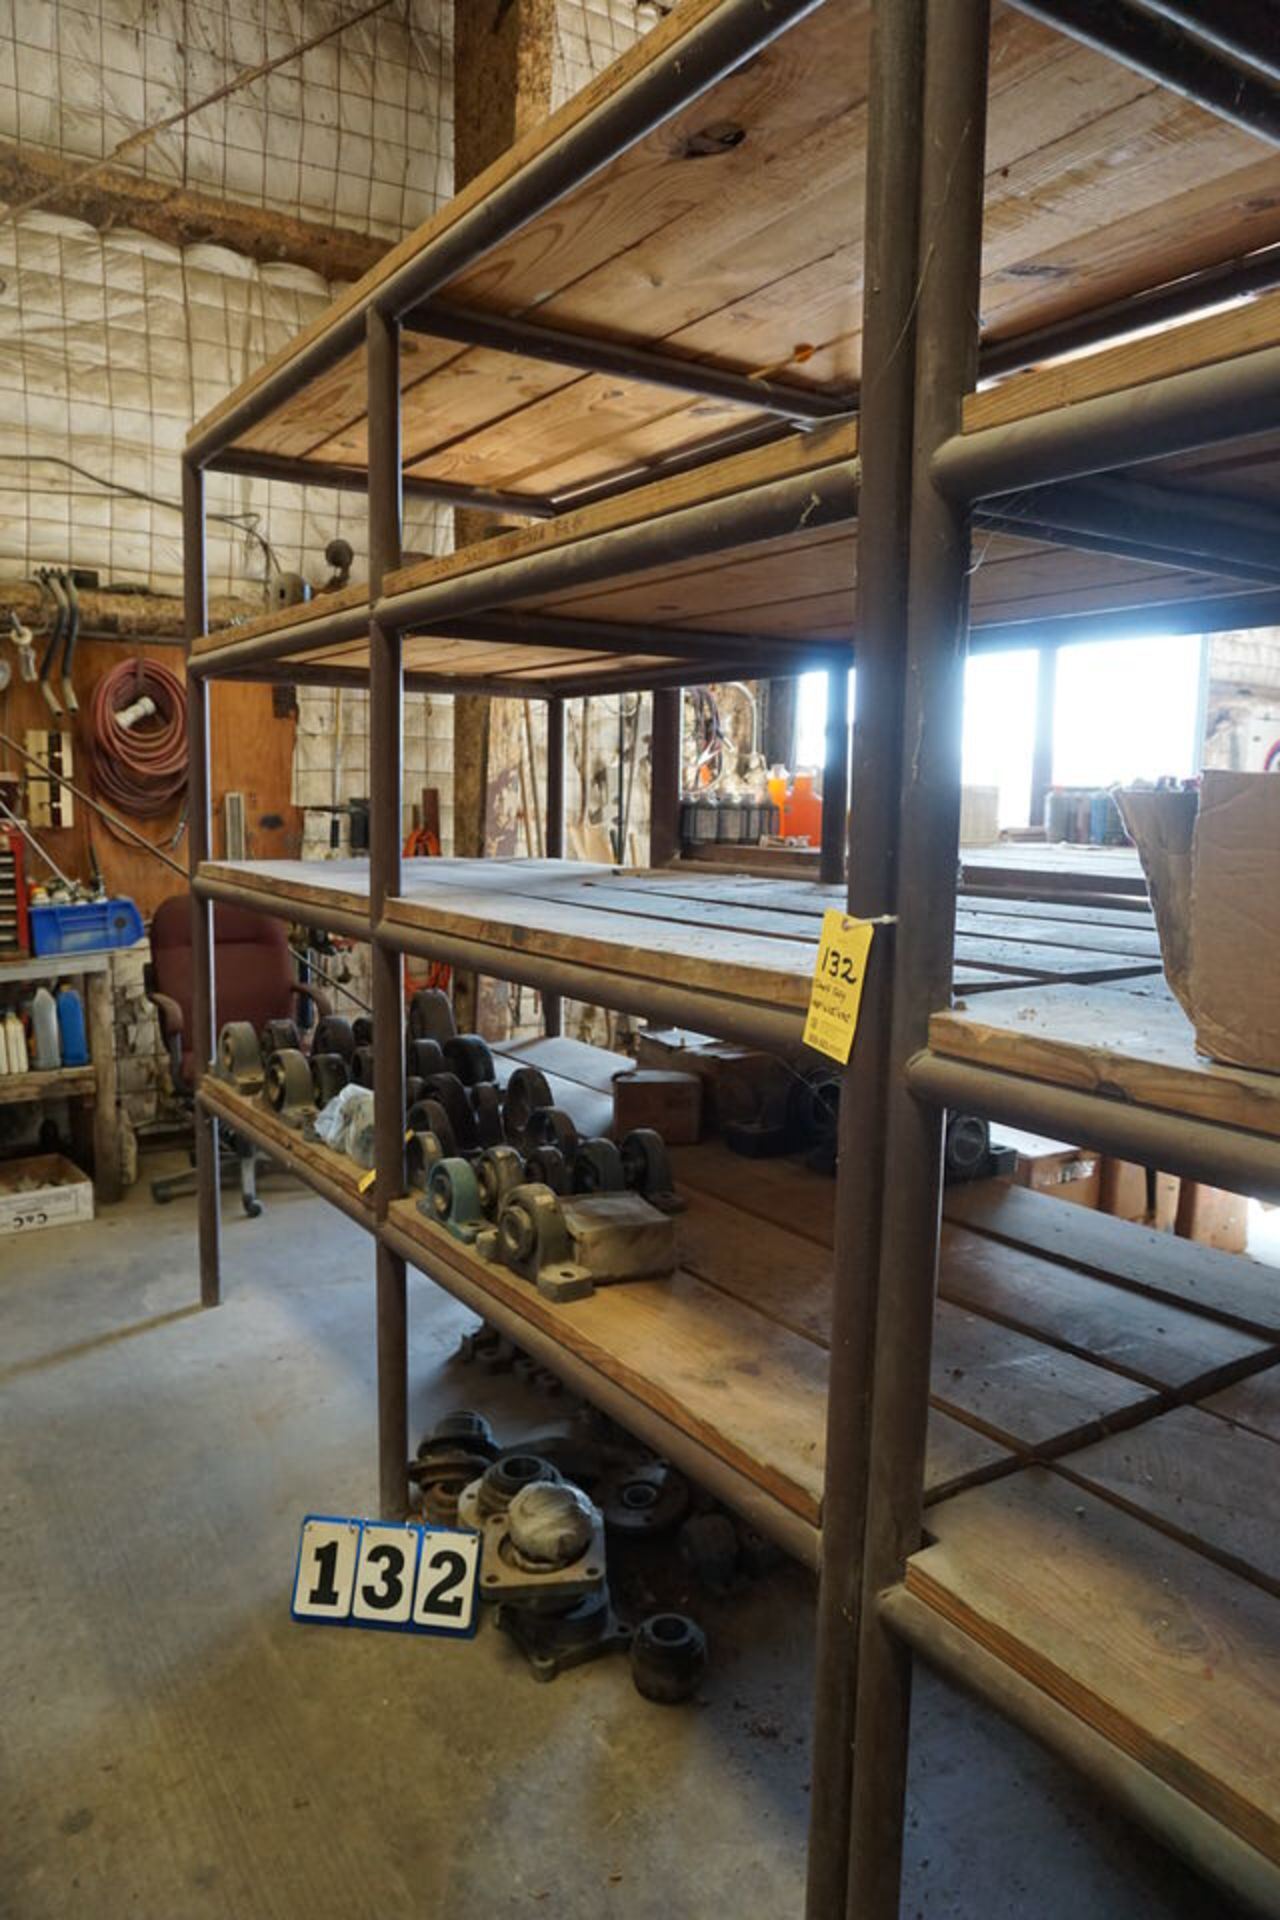 HD PIPE SHELF W/ 2" X 12" WOODEN SHELVES APPROX 48"D X 112"W X 96"HT, NO CONTENTS, DELAYED REMOVAL